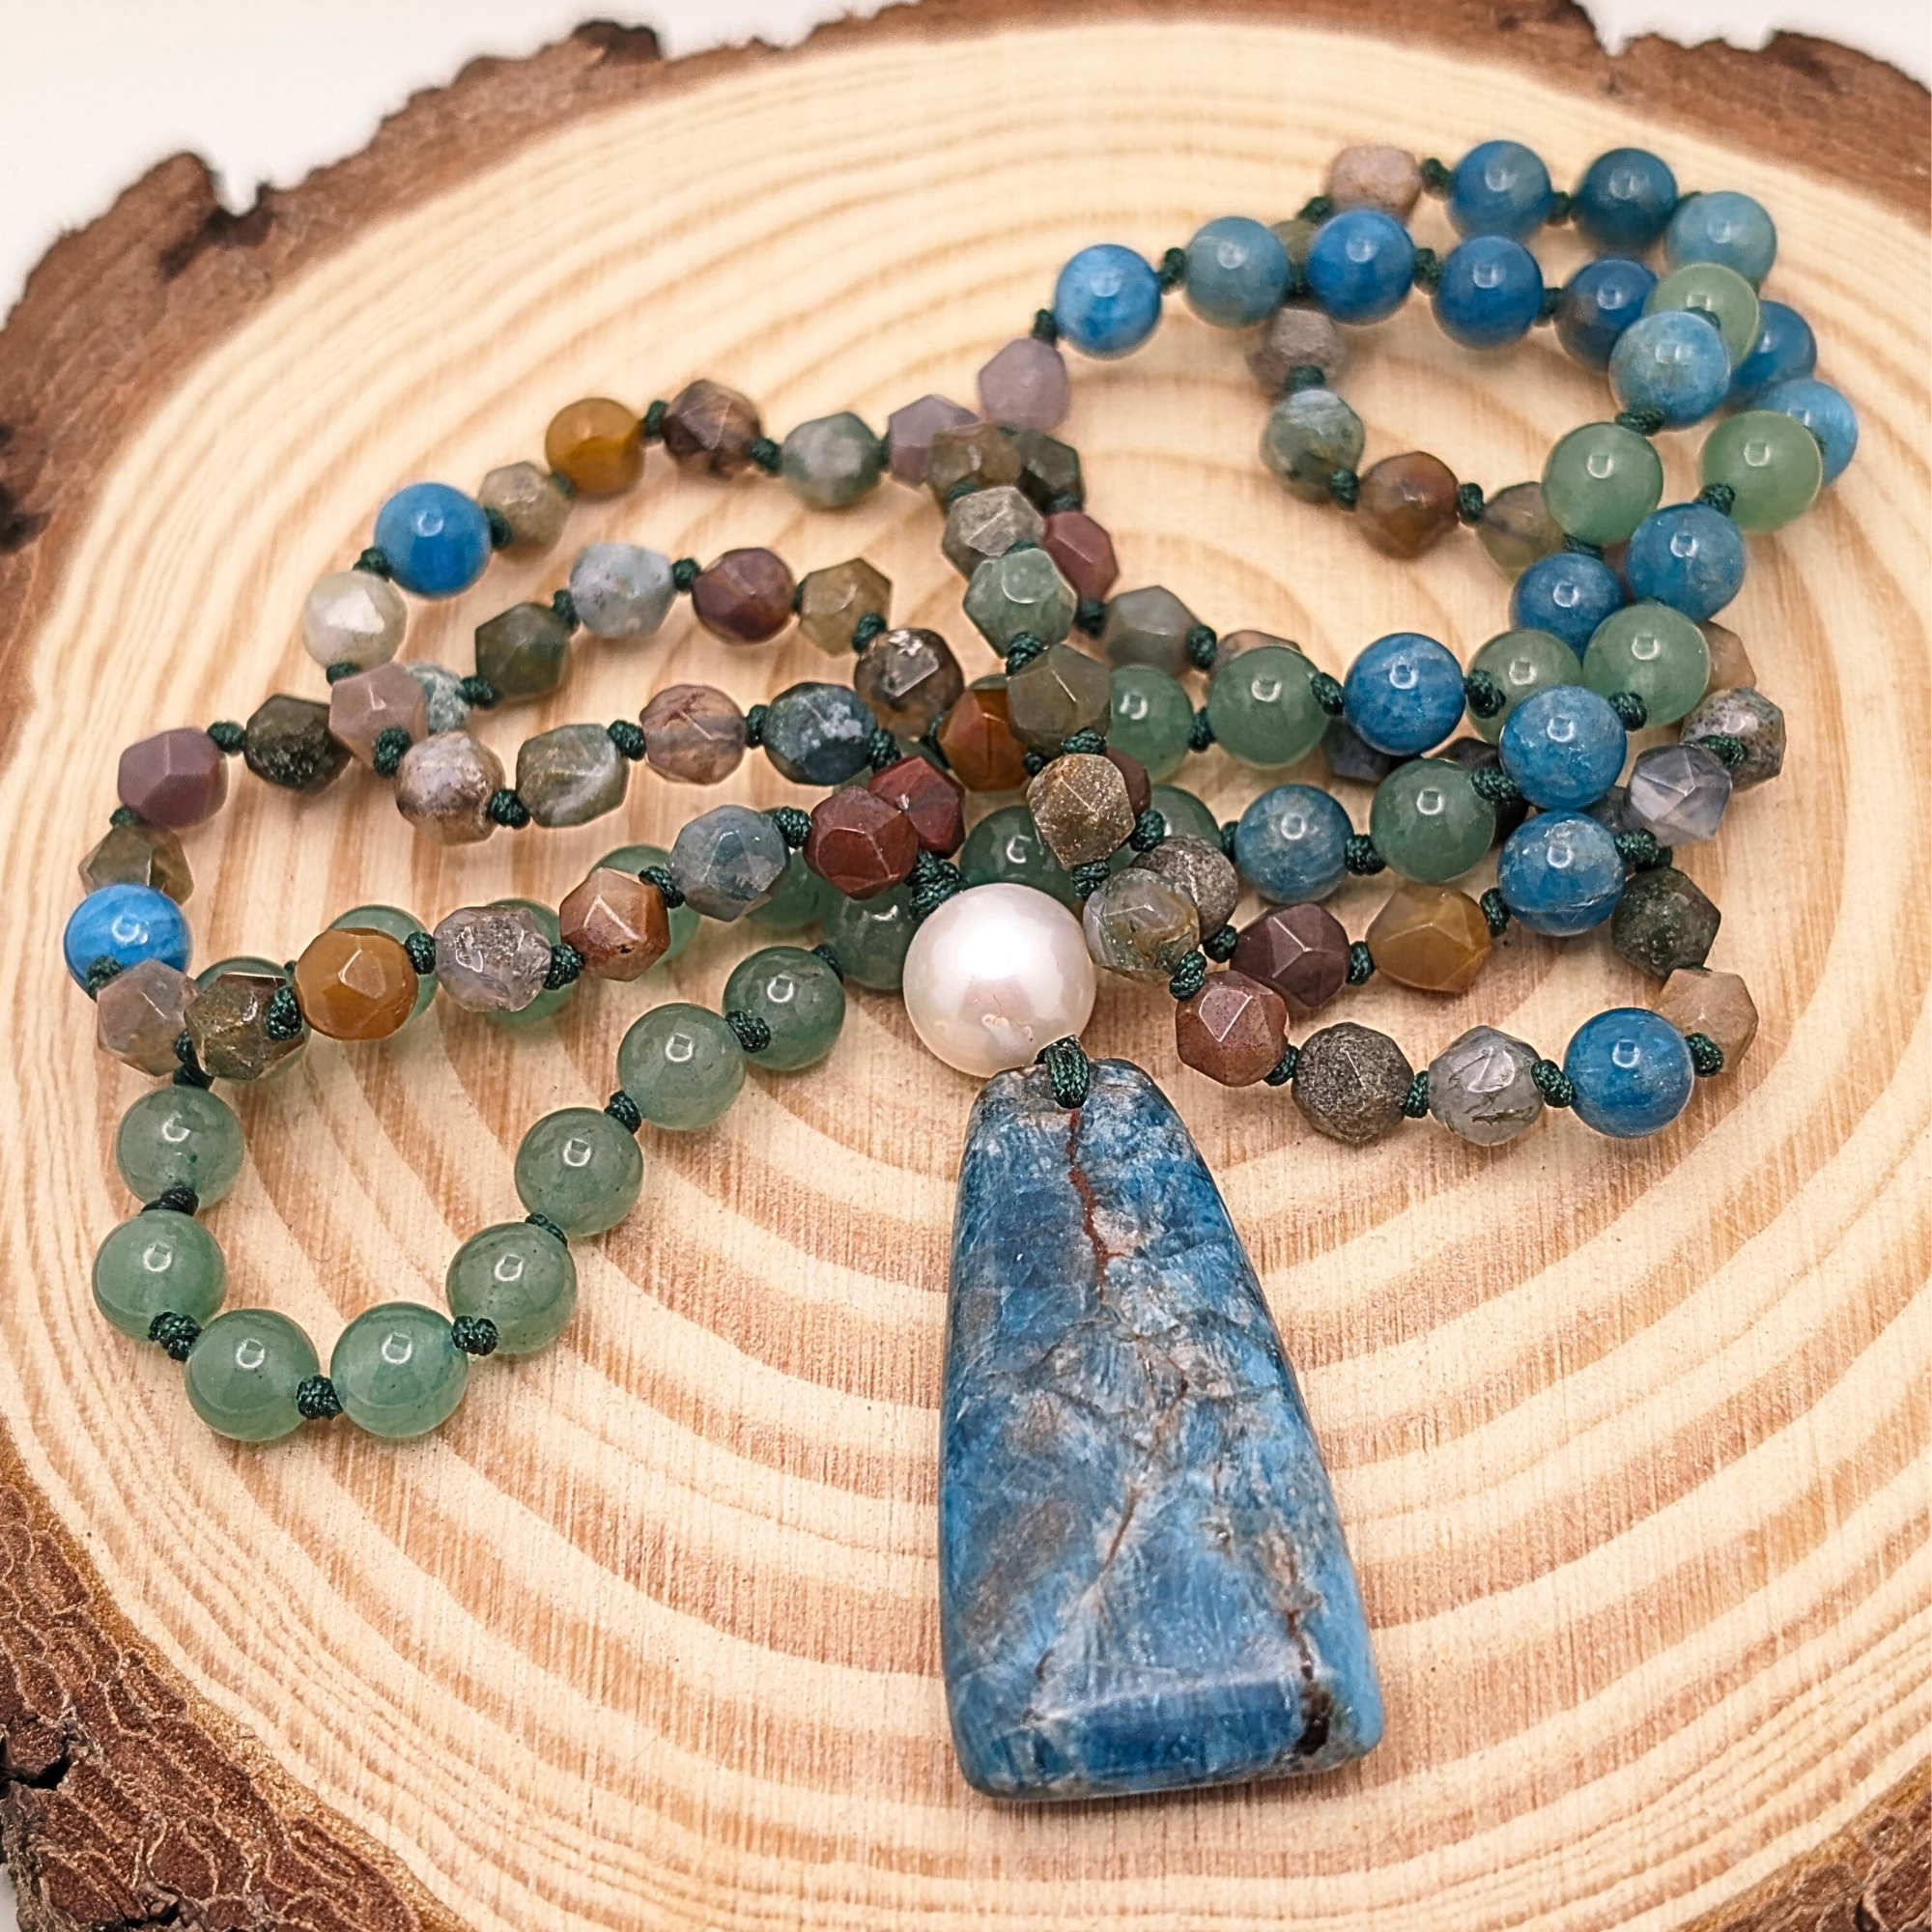 Malas and Knotted Necklaces